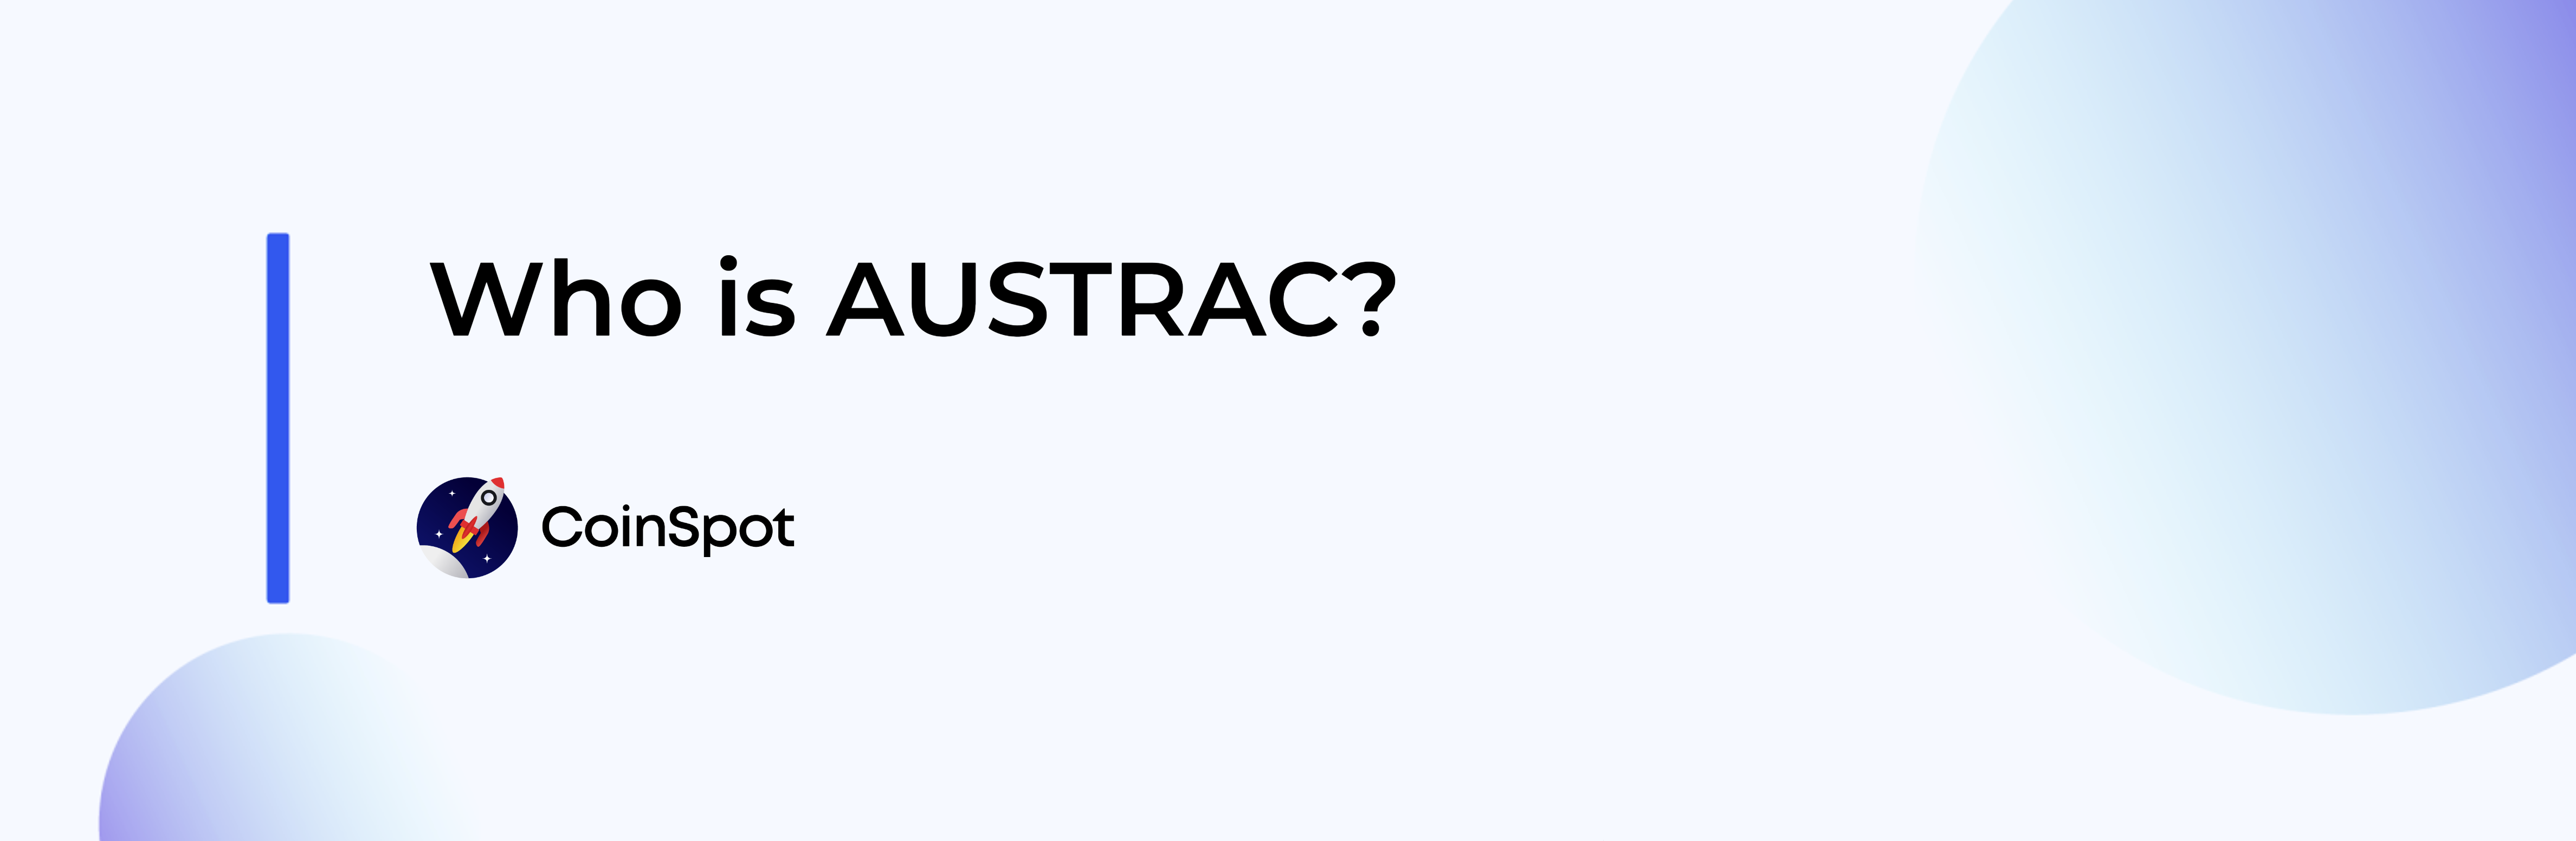 CoinSpot - Who is AUSTRAC.png